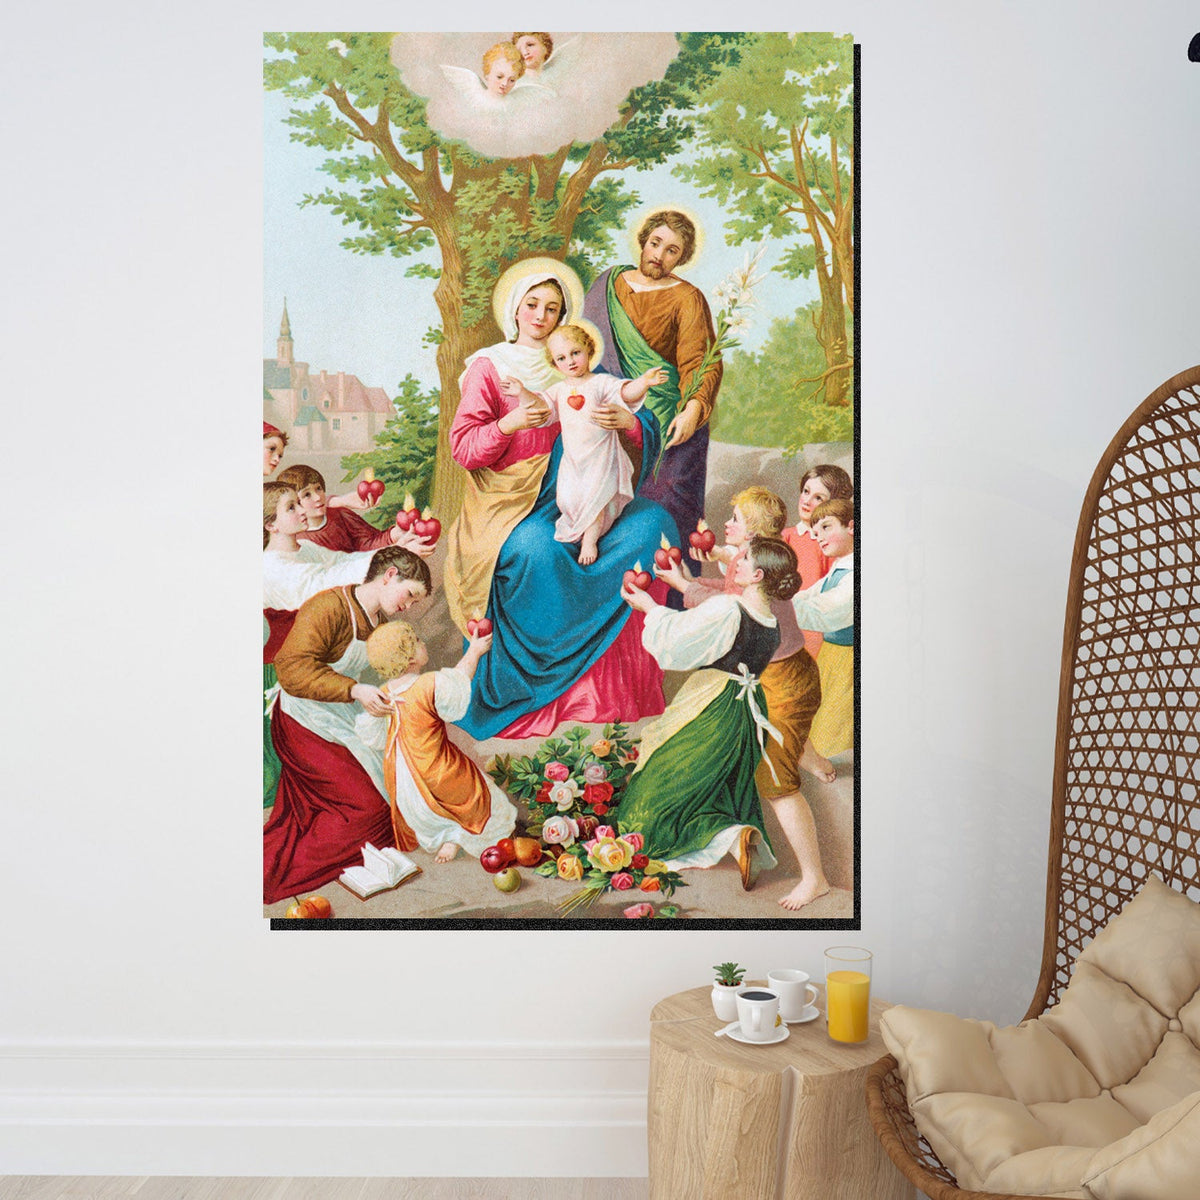 https://cdn.shopify.com/s/files/1/0387/9986/8044/products/TheBlessedHolyFamilyCanvasArtprintStretched-2.jpg